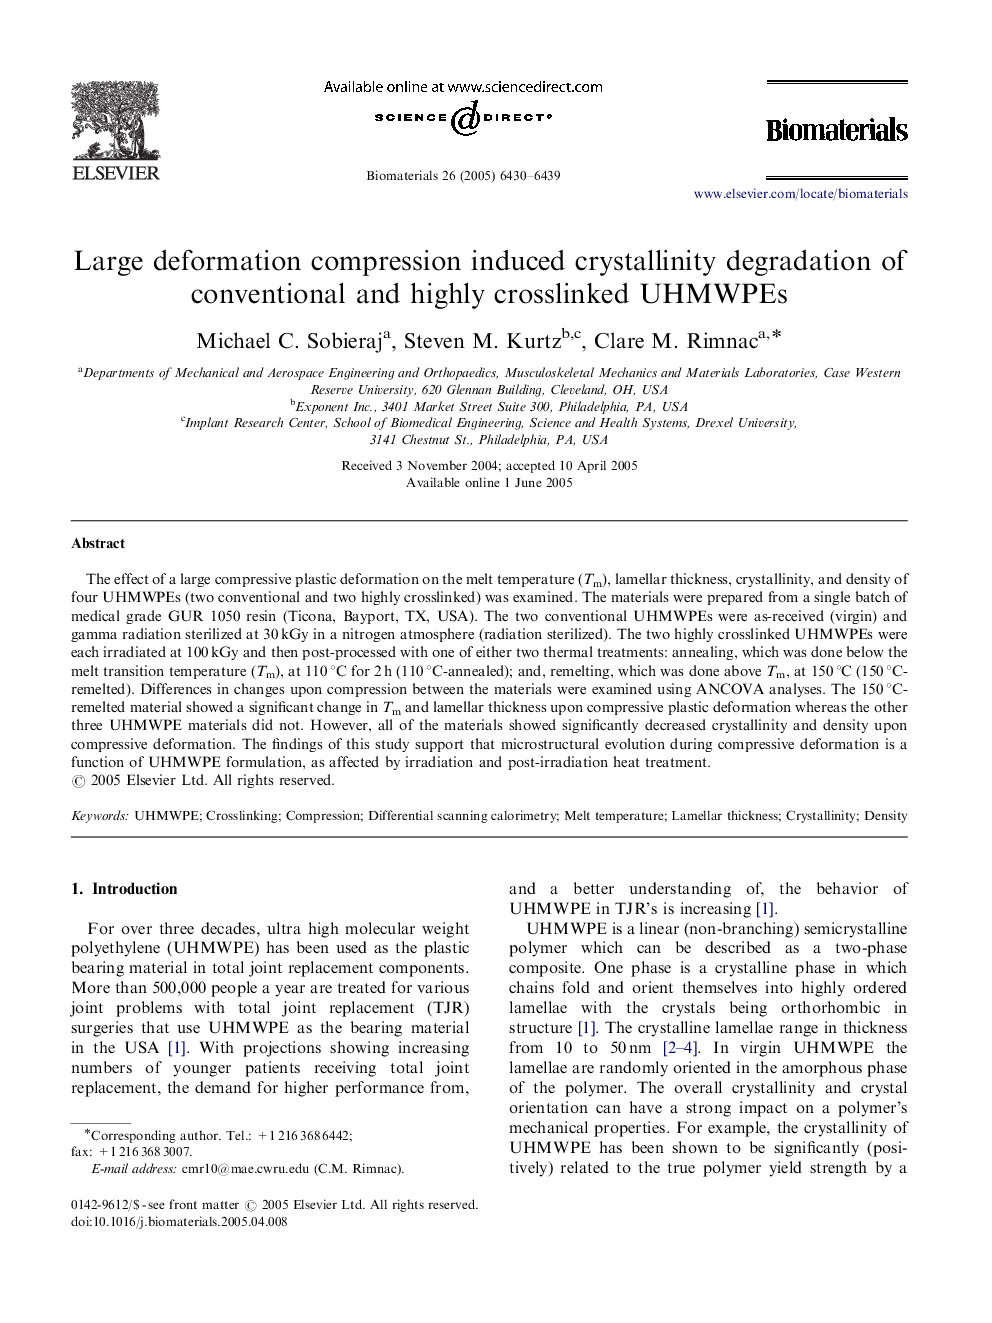 Large deformation compression induced crystallinity degradation of conventional and highly crosslinked UHMWPEs